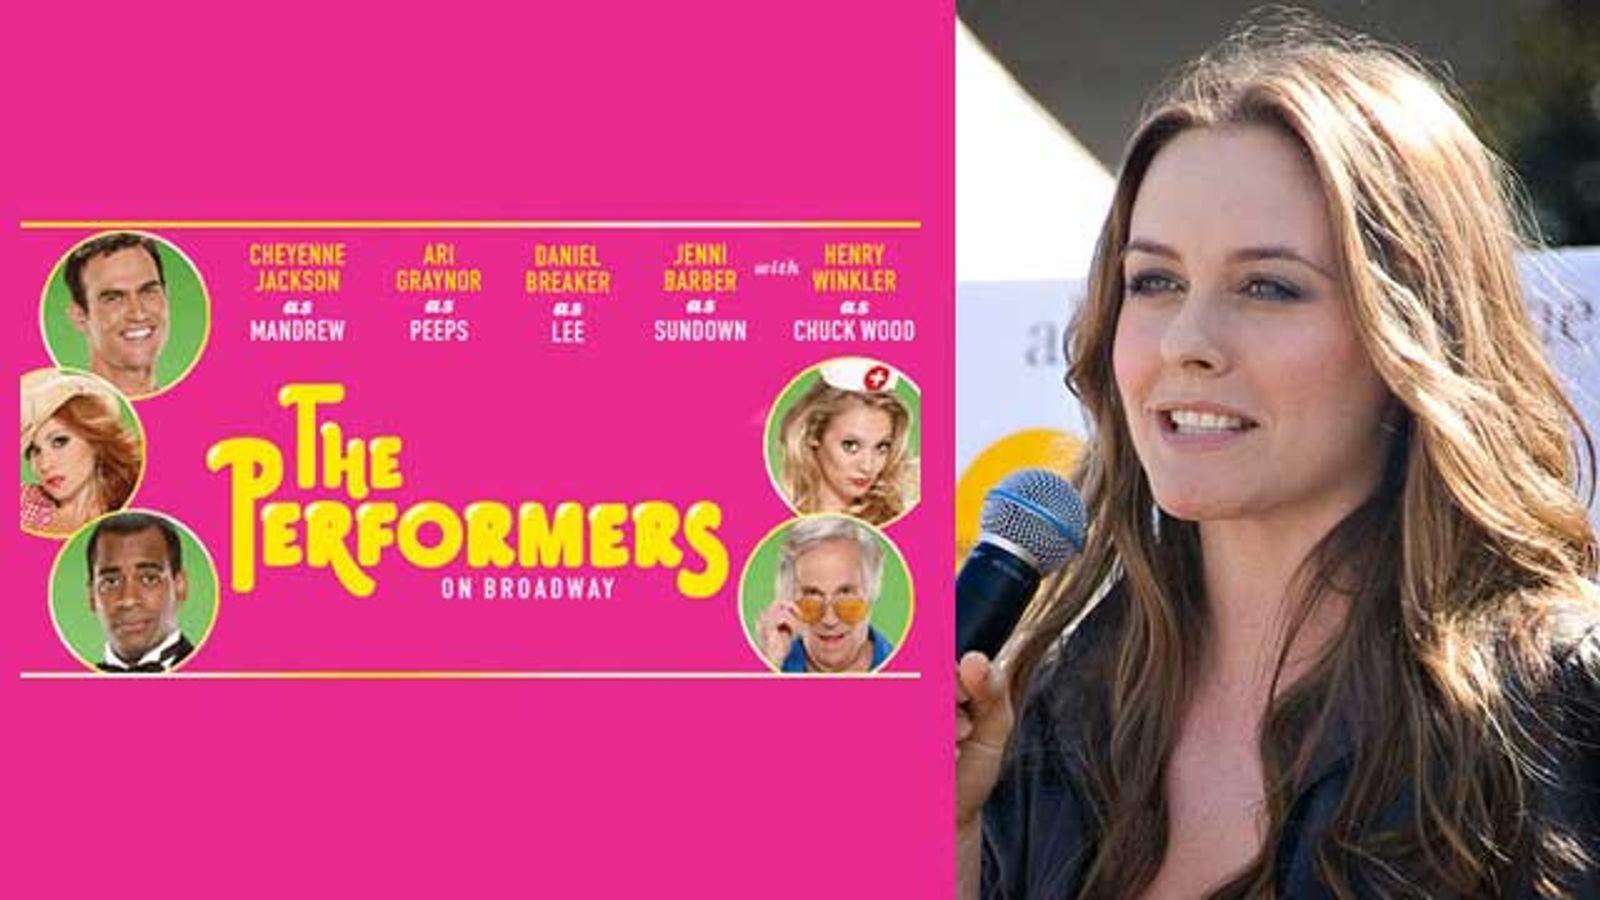 Alicia Silverstone Joins Cast of Broadway Porn Comedy